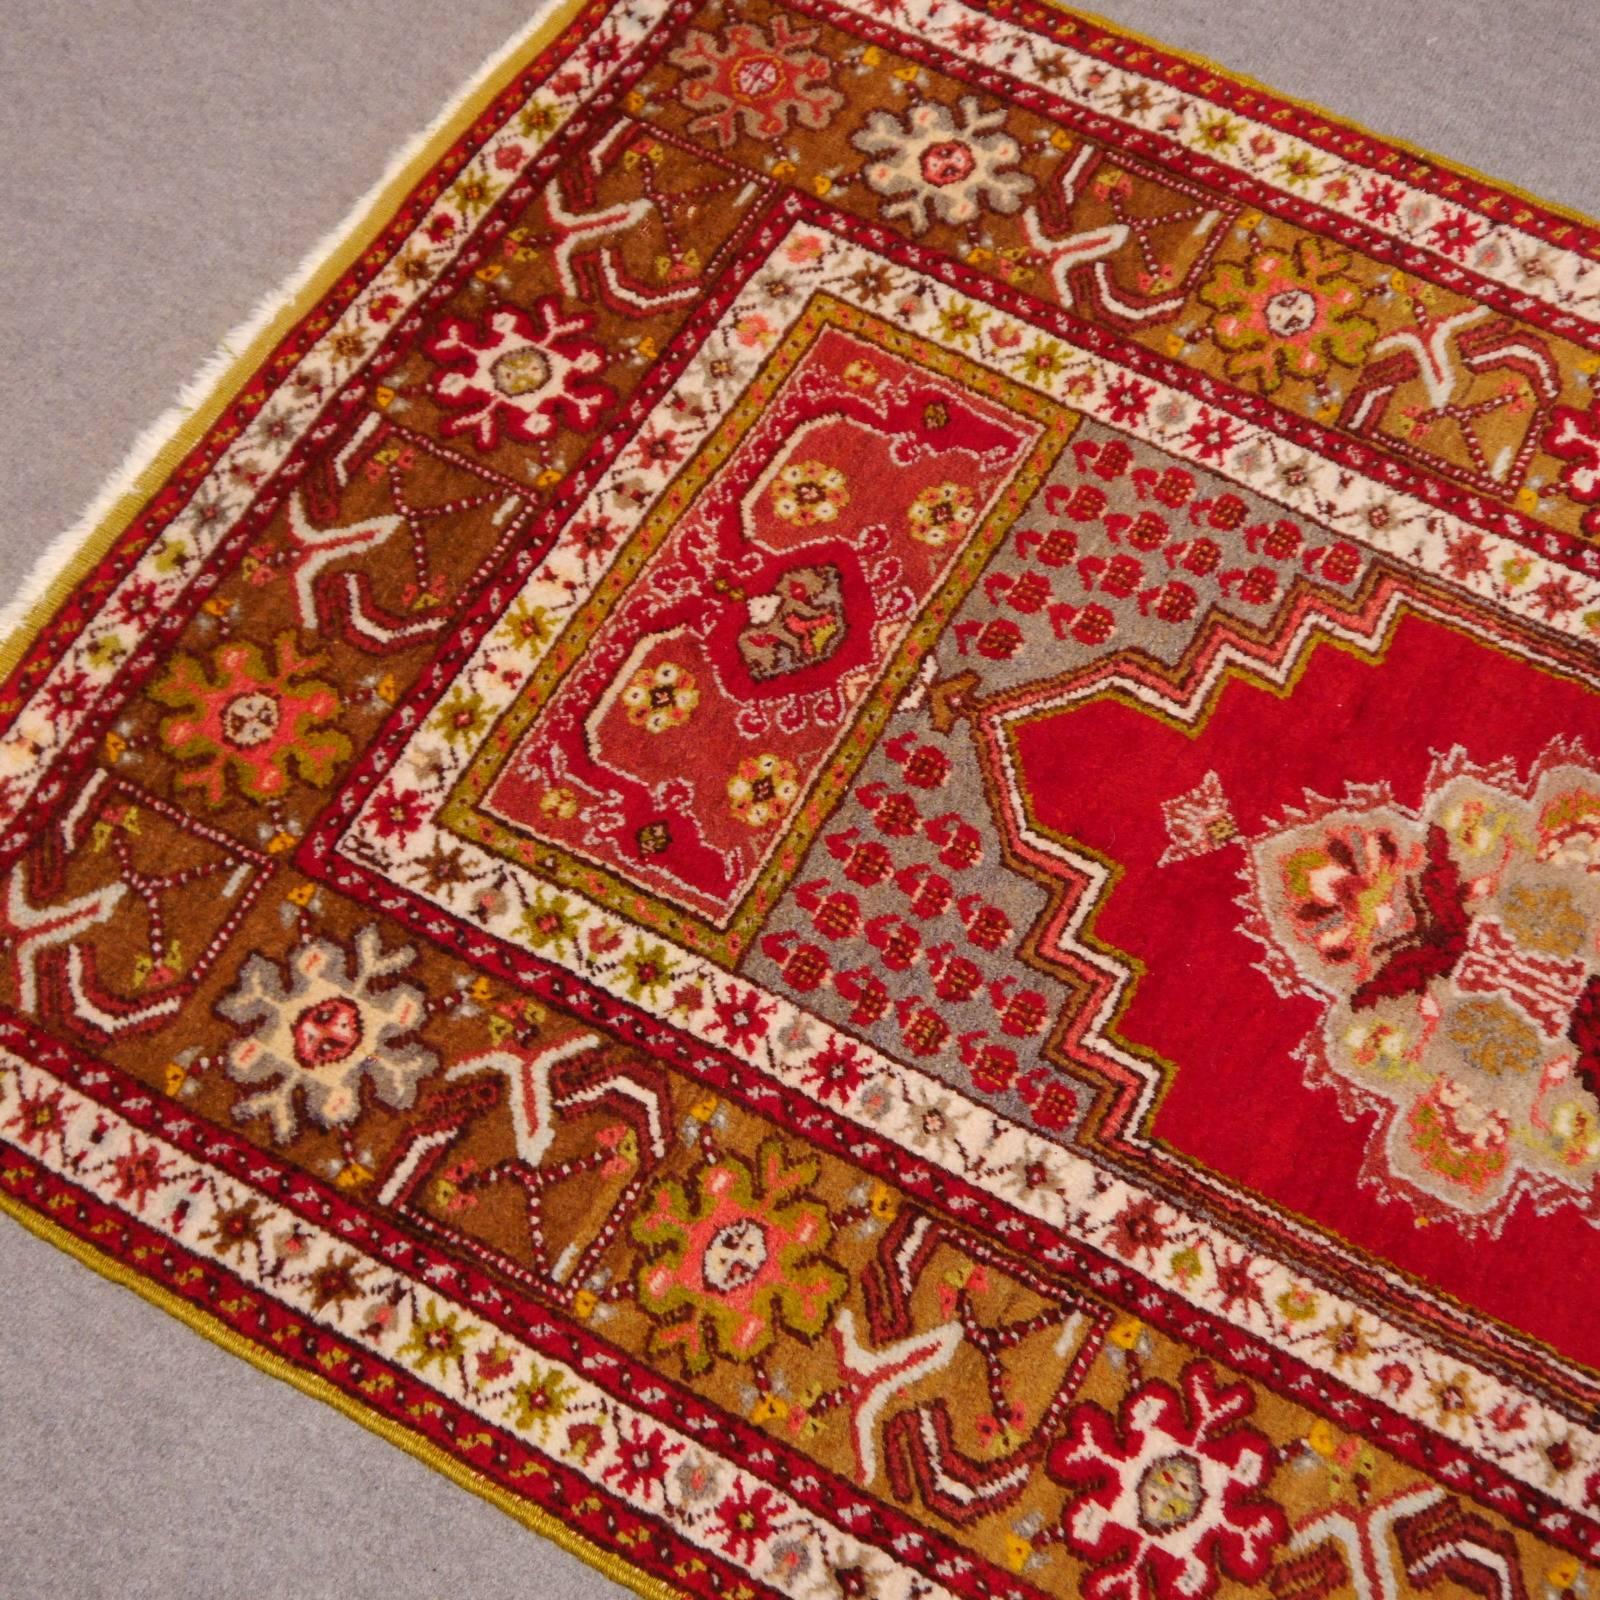 Beautiful Turkish Kirsehir rug, full pile and in exquisite condition.

The Djoharian Design Collection is located in Germany, all our rugs are shipped from there. We are licensed FAIR-TRADE partner of LABEL STEP FAIR TRADE CARPETS. Label STEP is the